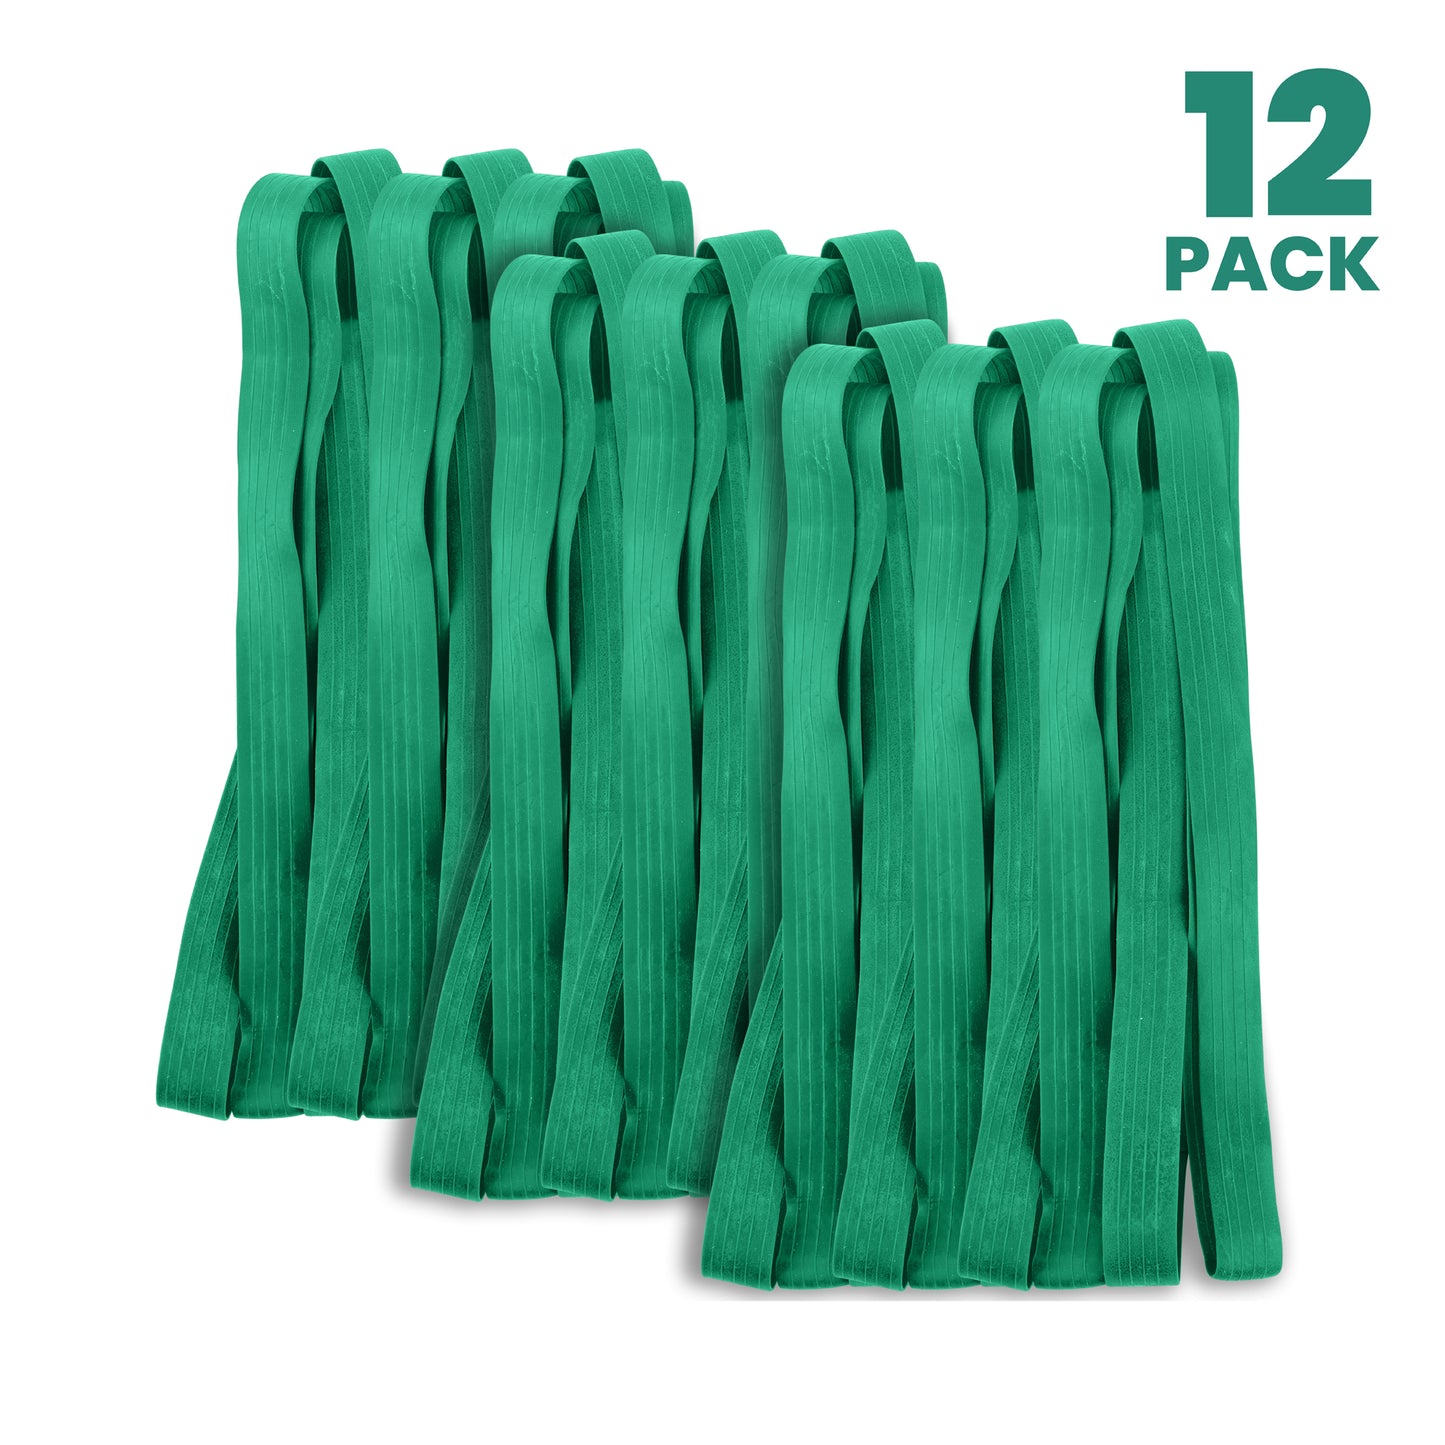 Furniture Mover Rubber Bands - Pack of 12